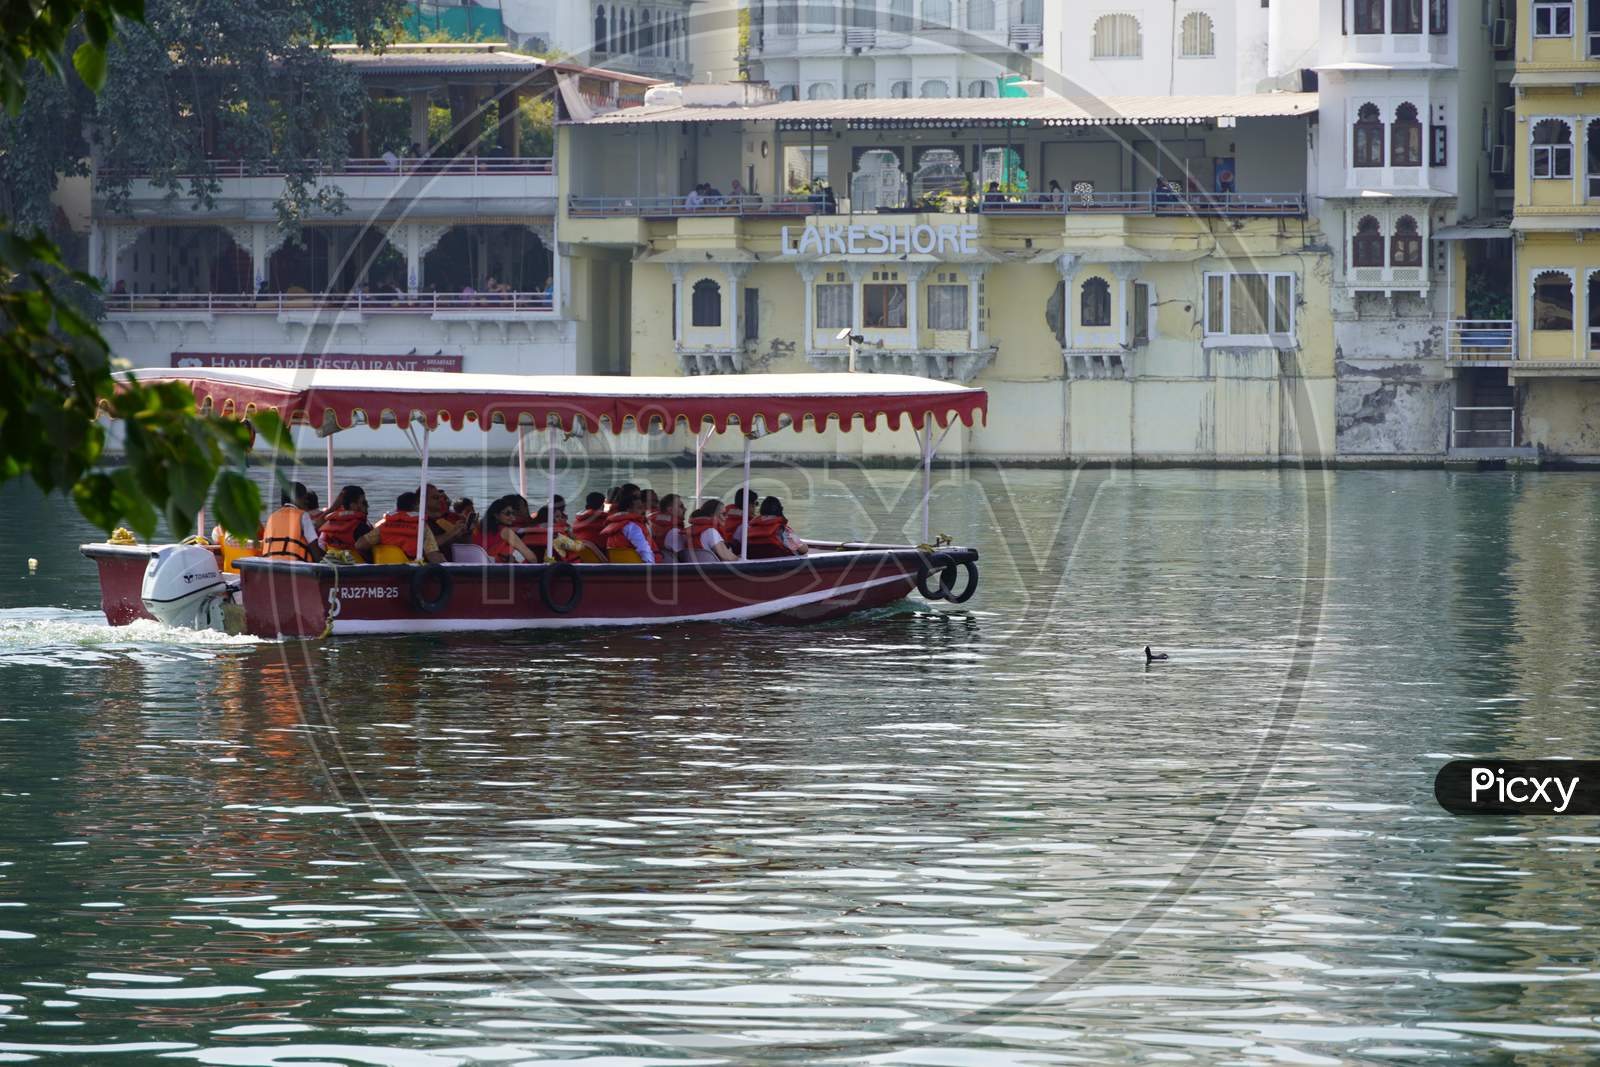 Side View Of Passenger Transportation With Boat, Water Taxi Trip. People Wearing Life Jackets Traveling In Public Ferry Boat. Group Of Passengers Sitting On Benches : Udaipur India - February 2020